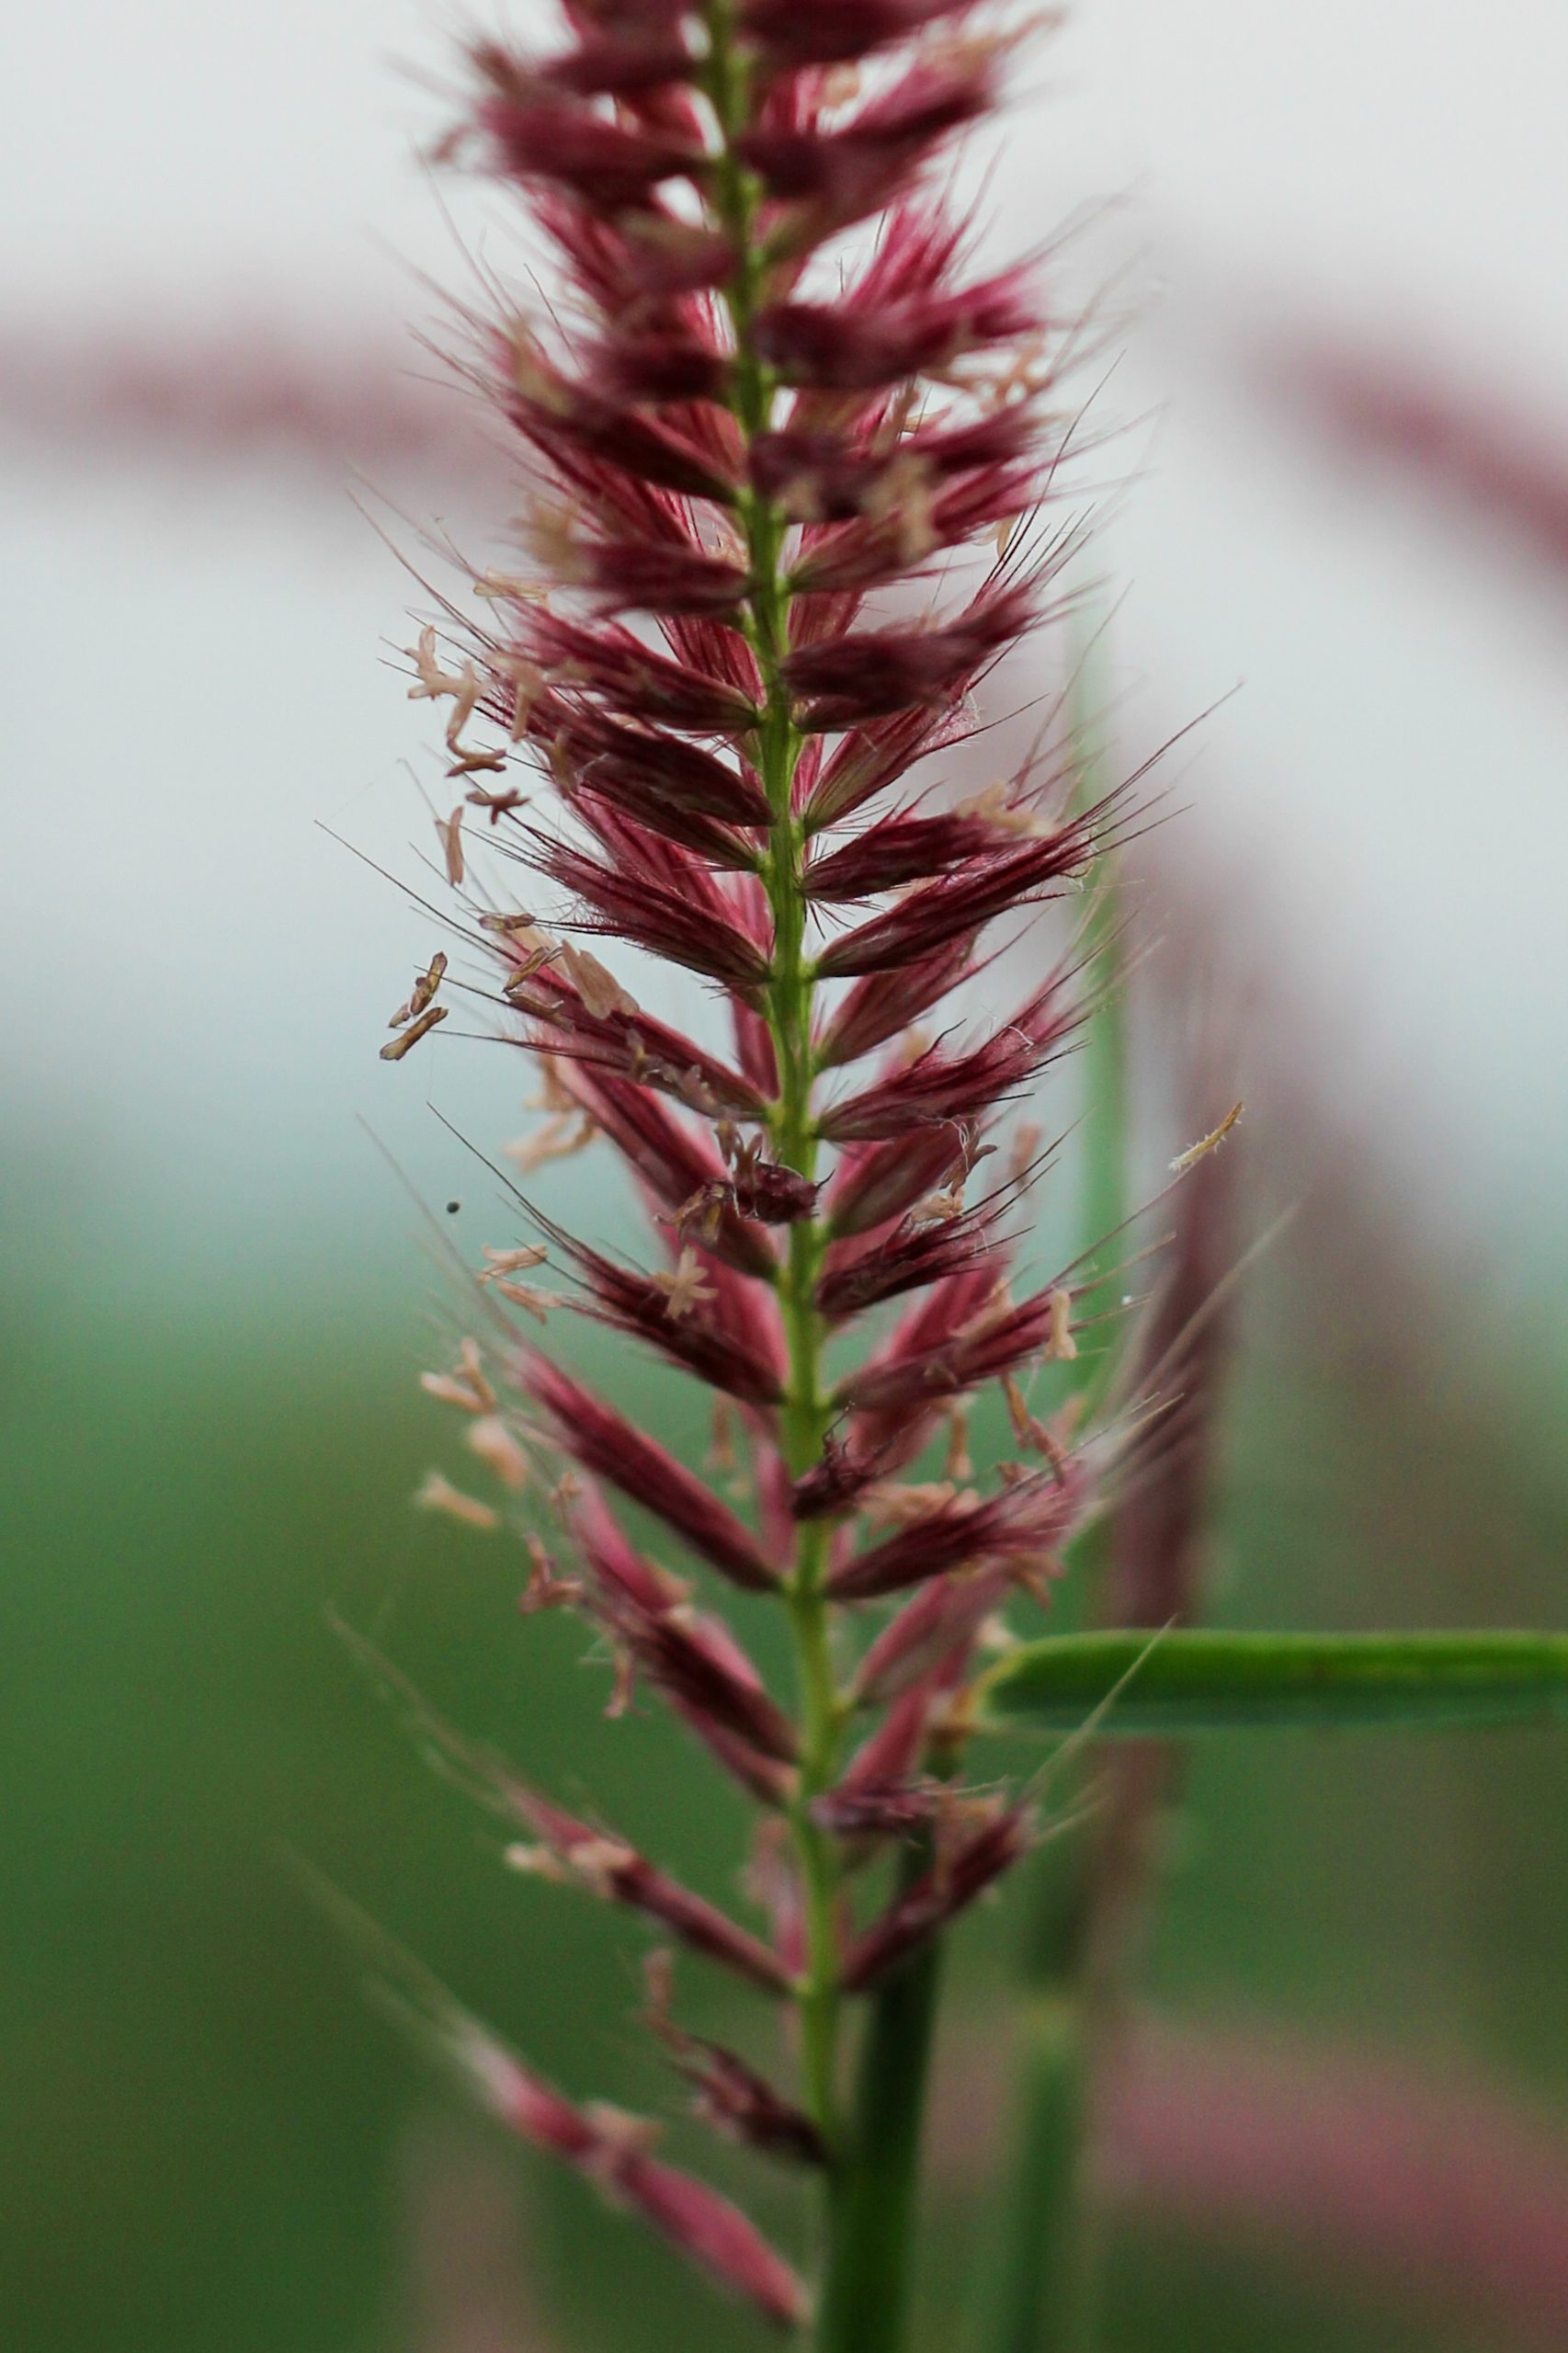 Flower of a grass plant